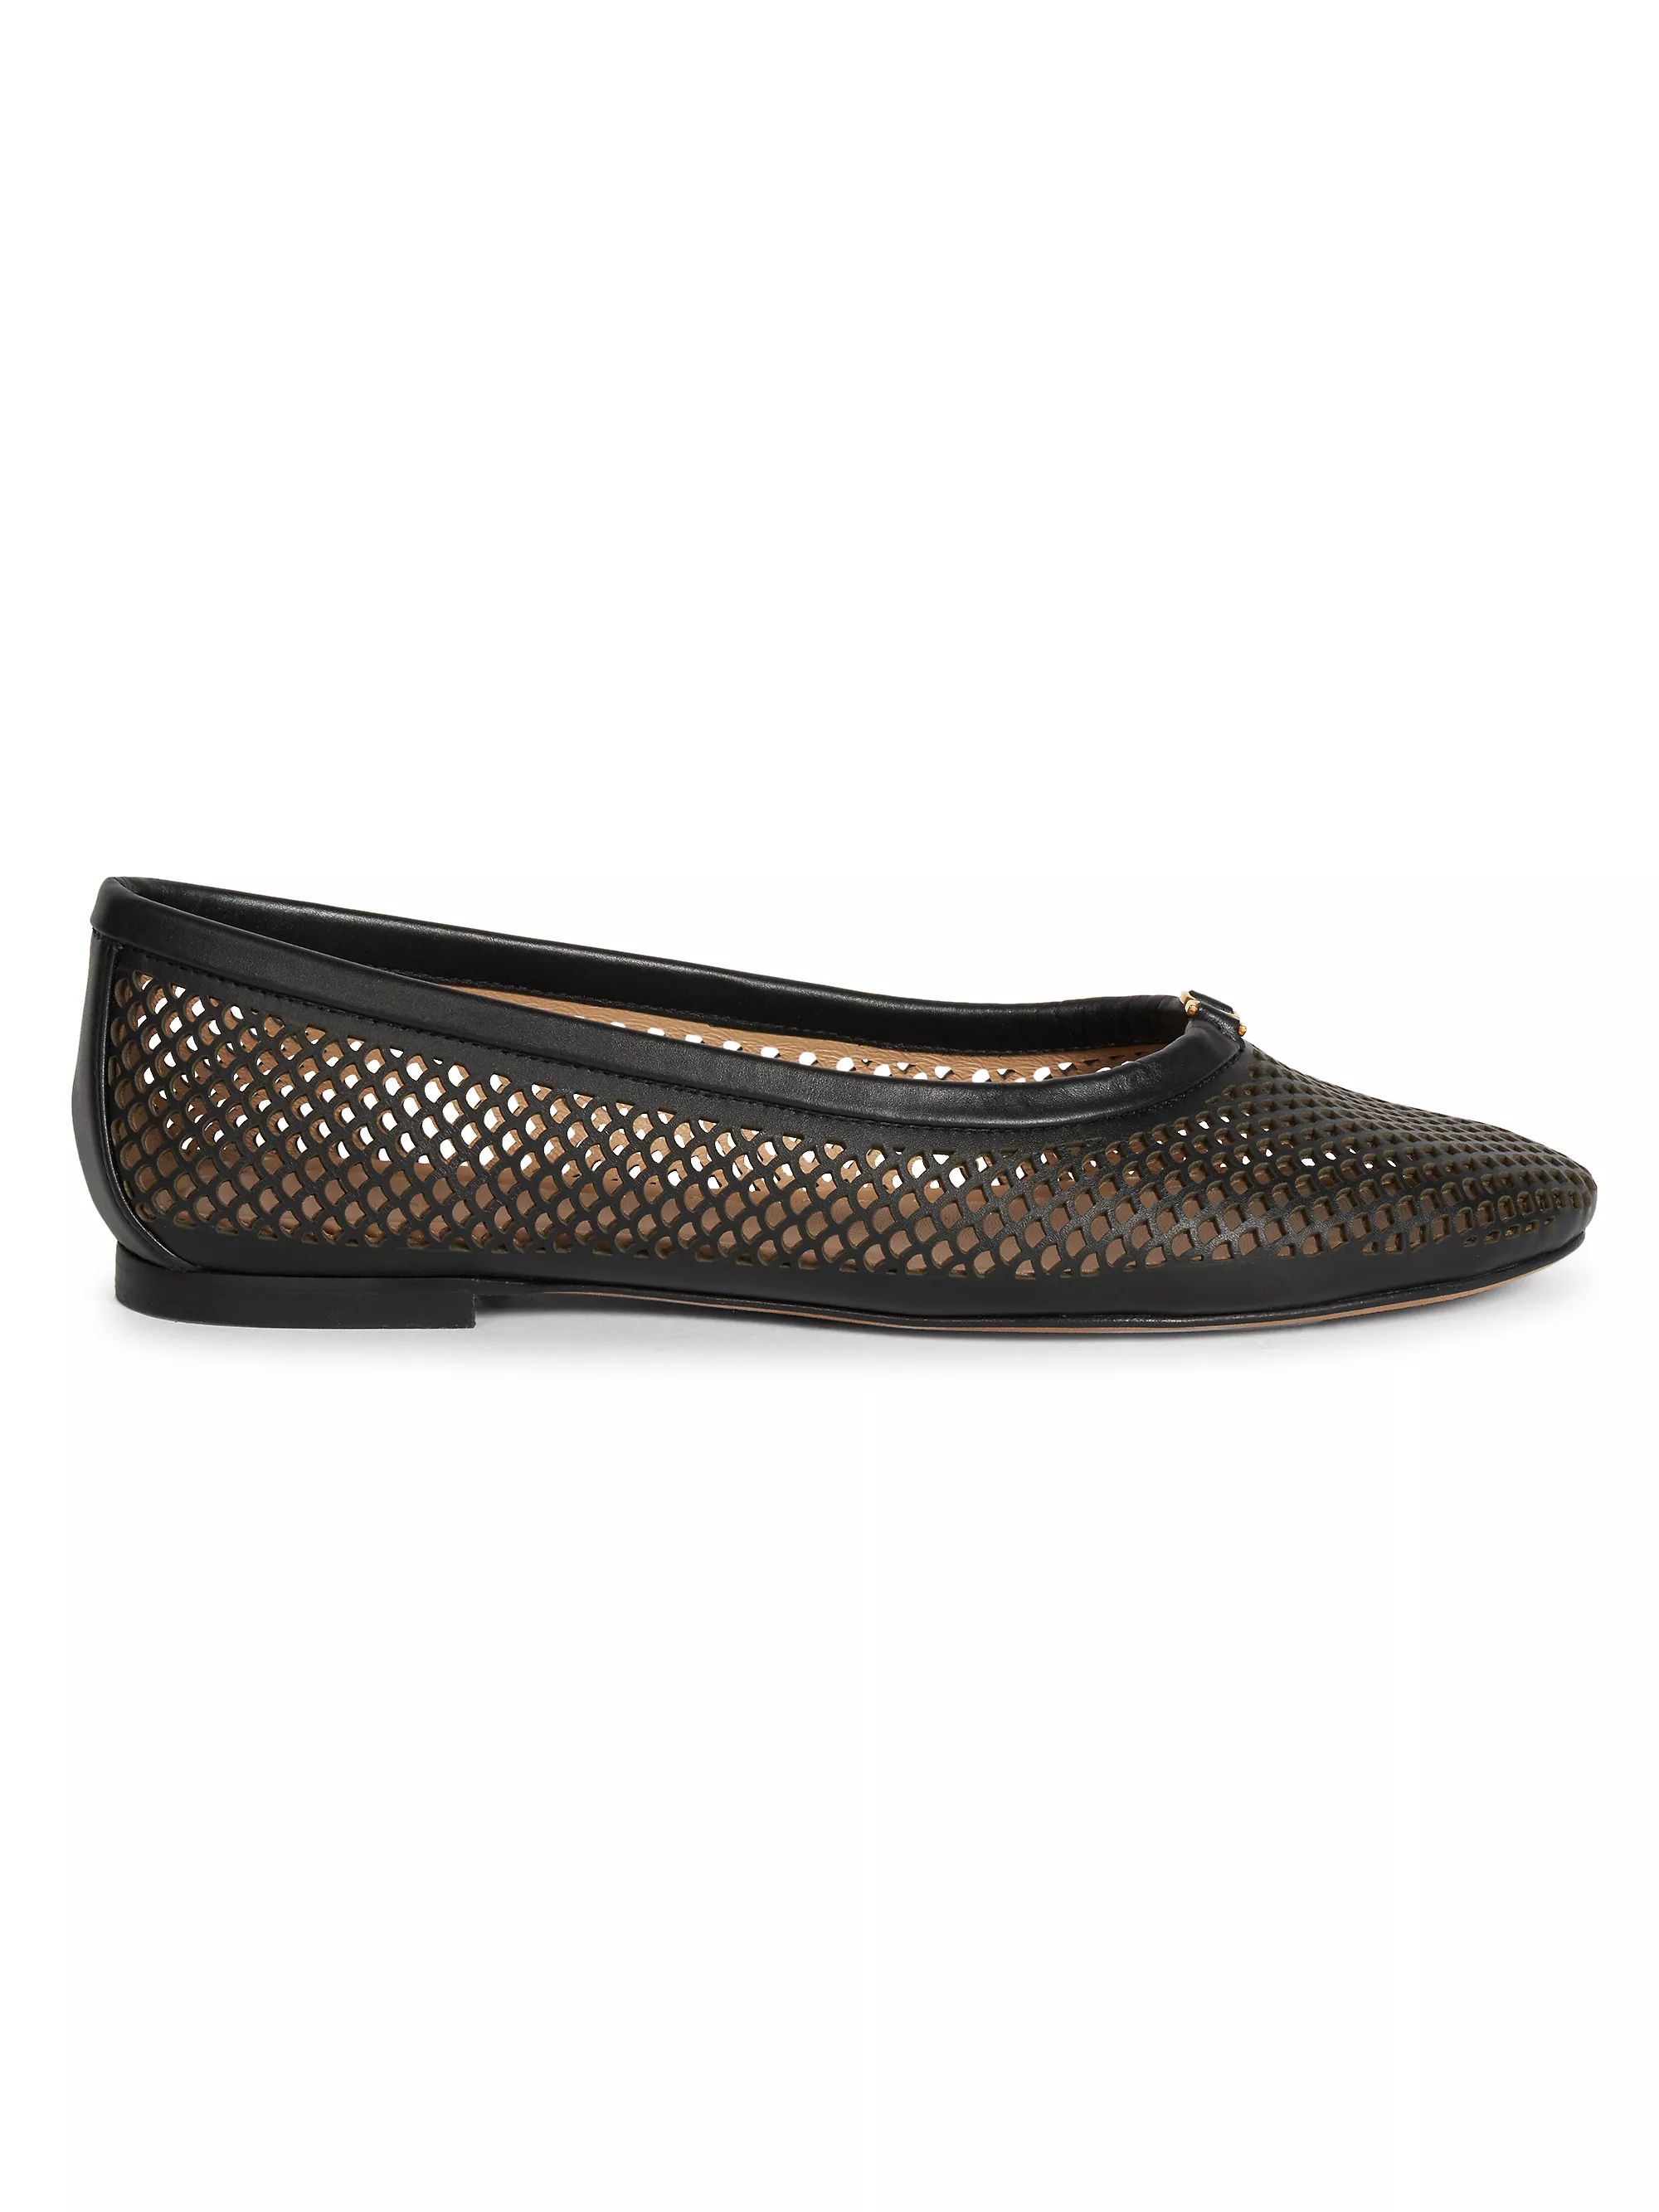 Marcie Perforated Leather Ballerina Flats | Saks Fifth Avenue